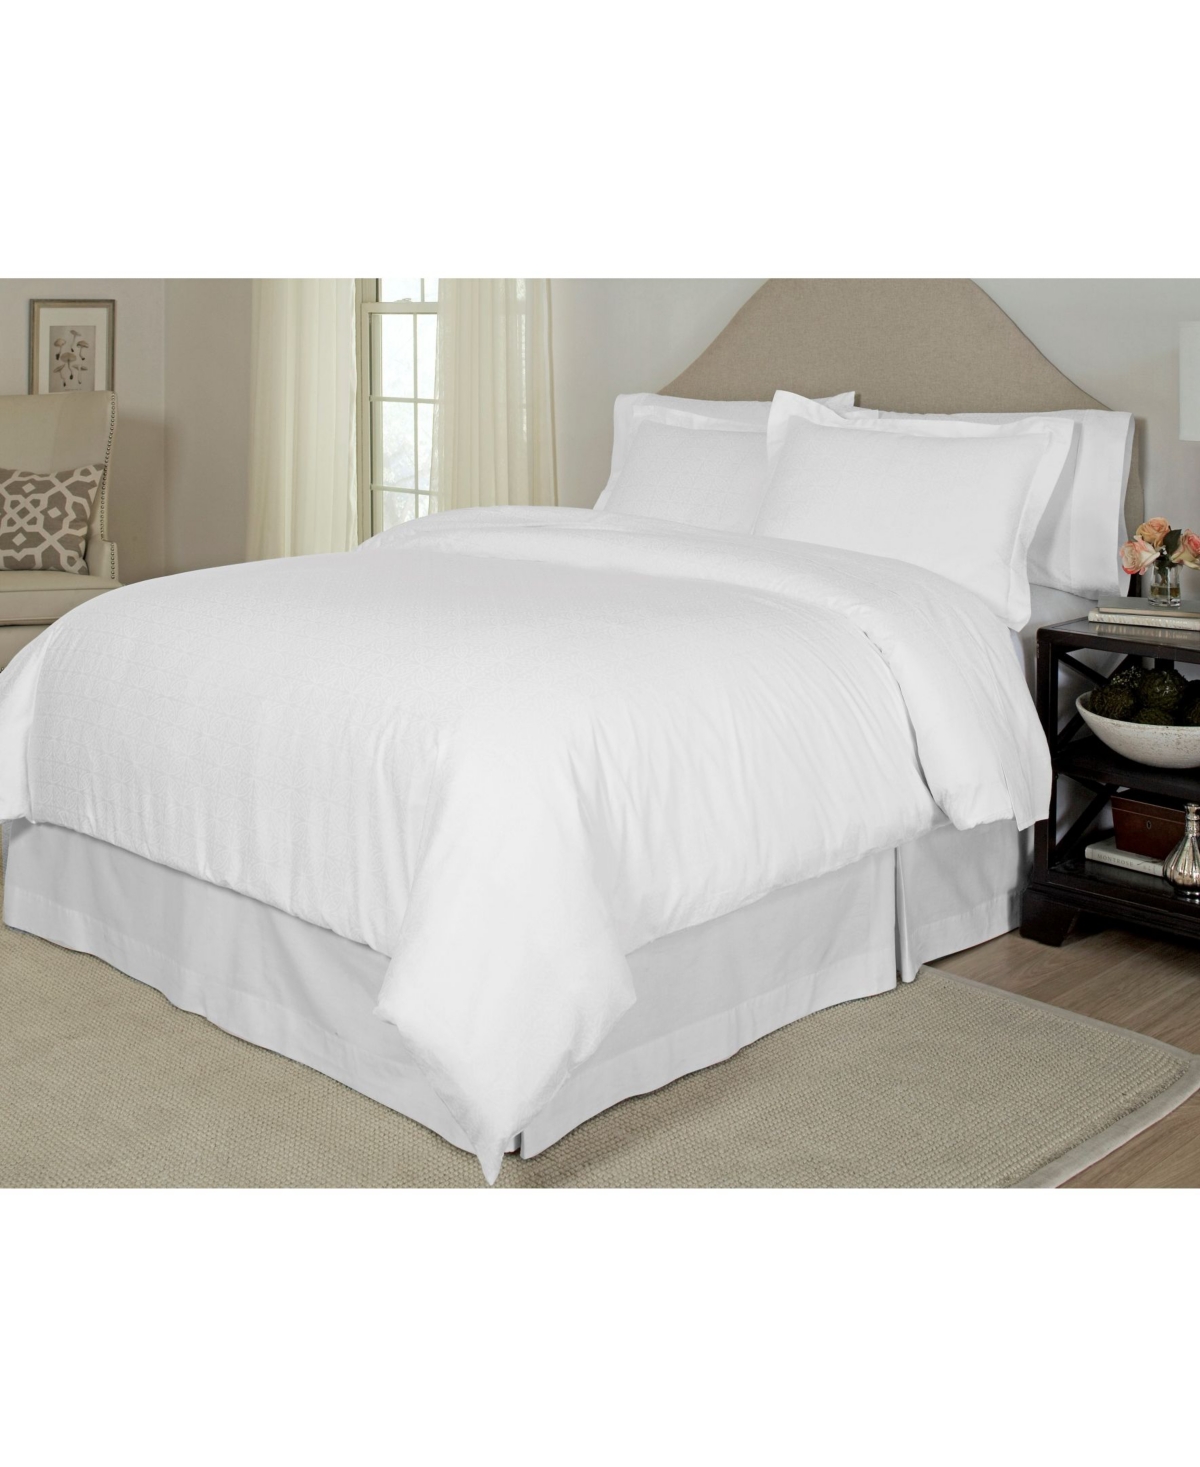 Pointehaven Printed 300 Thread Count Cotton Sateen Duvet Cover Set, King/california King In White